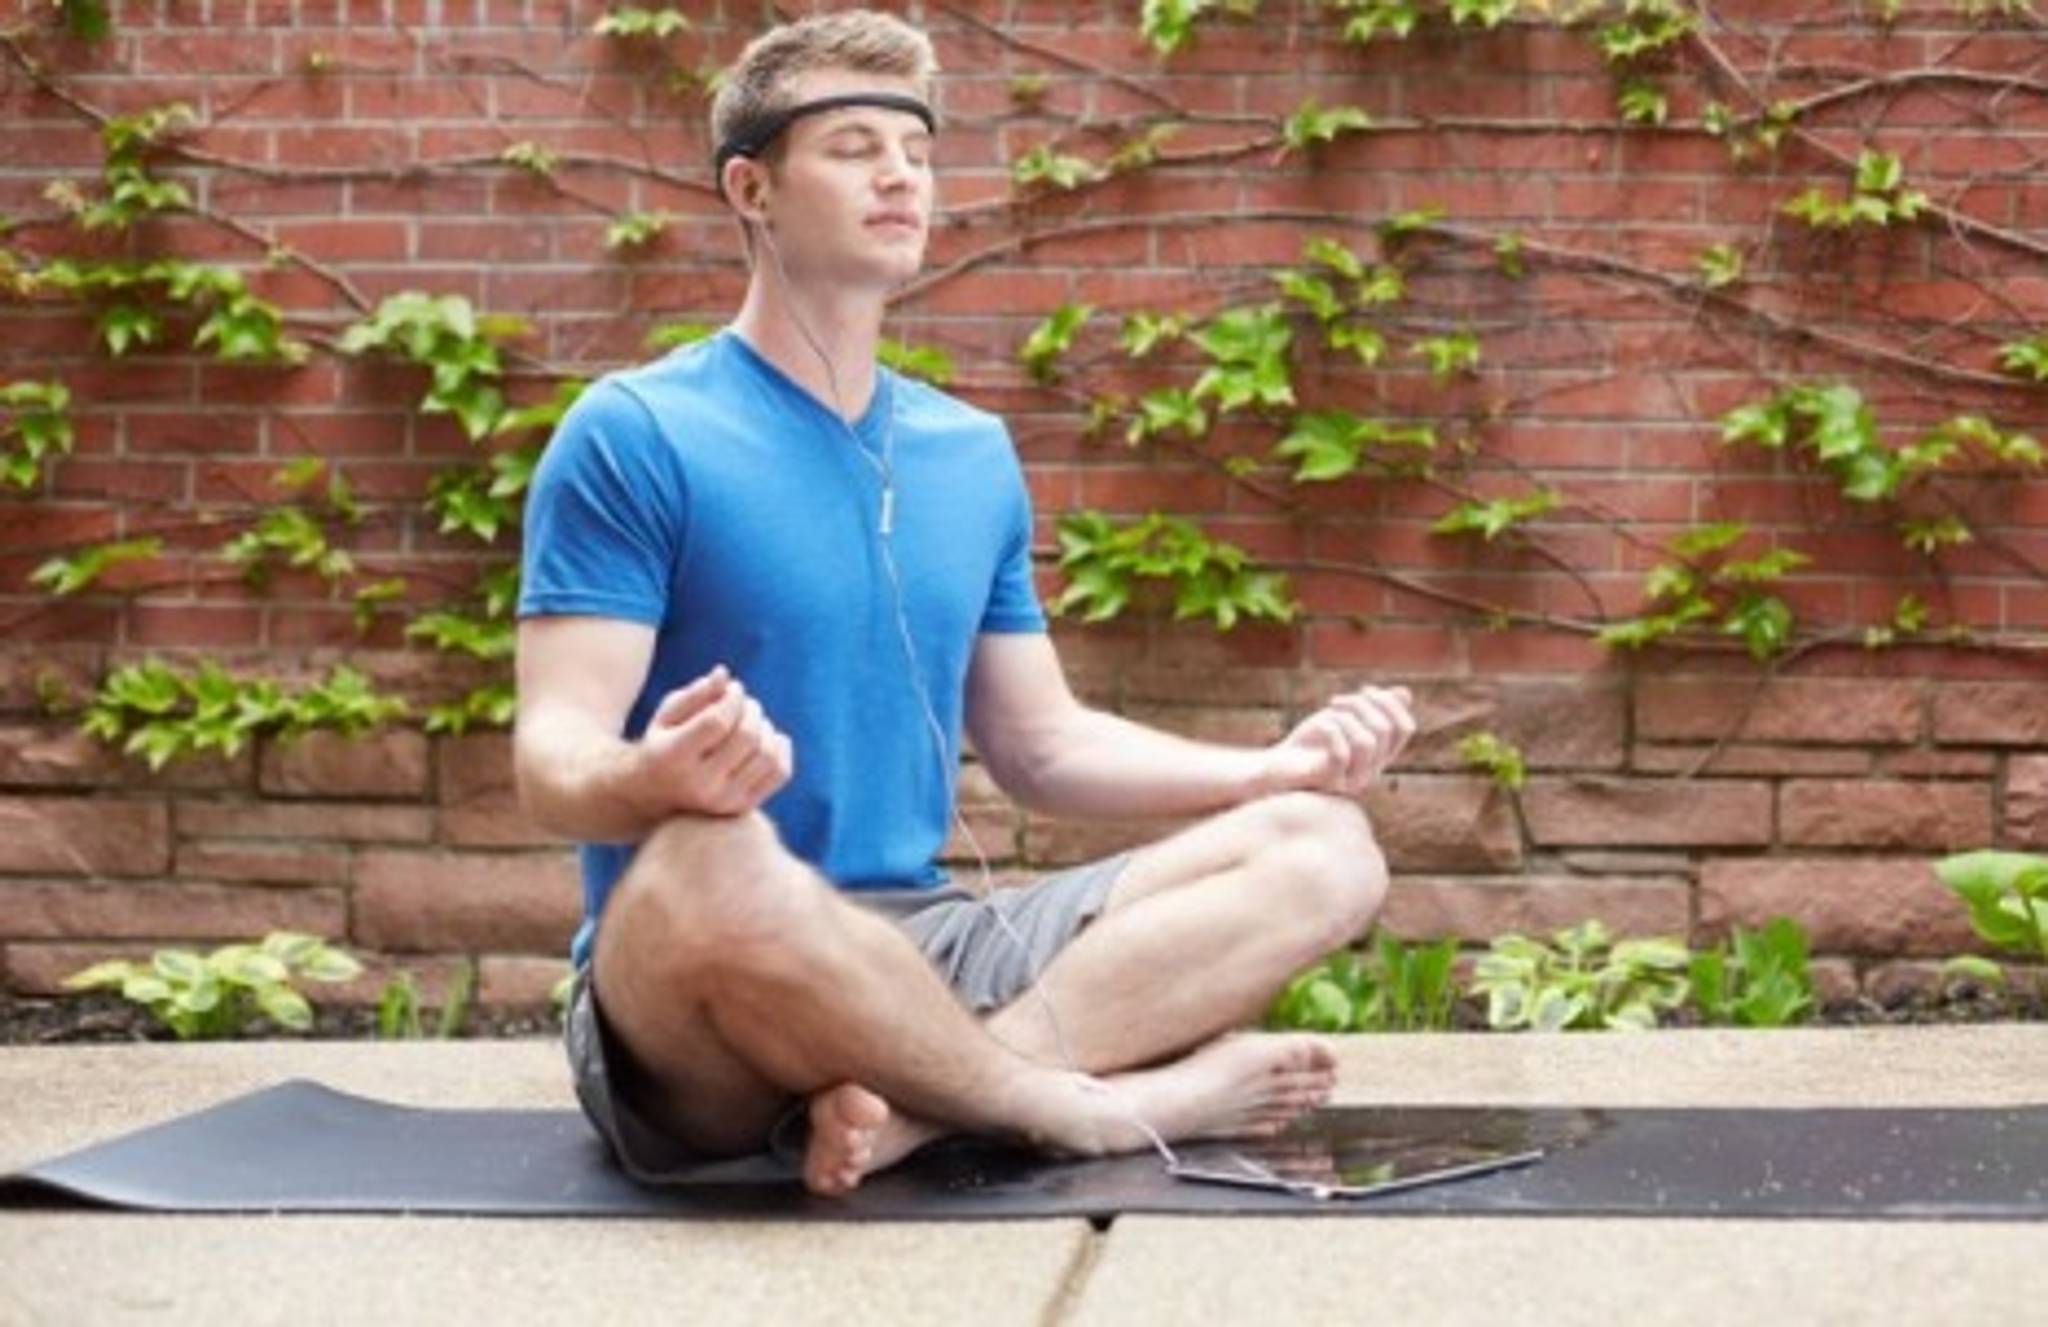 Muse is a headband that gamifies meditation